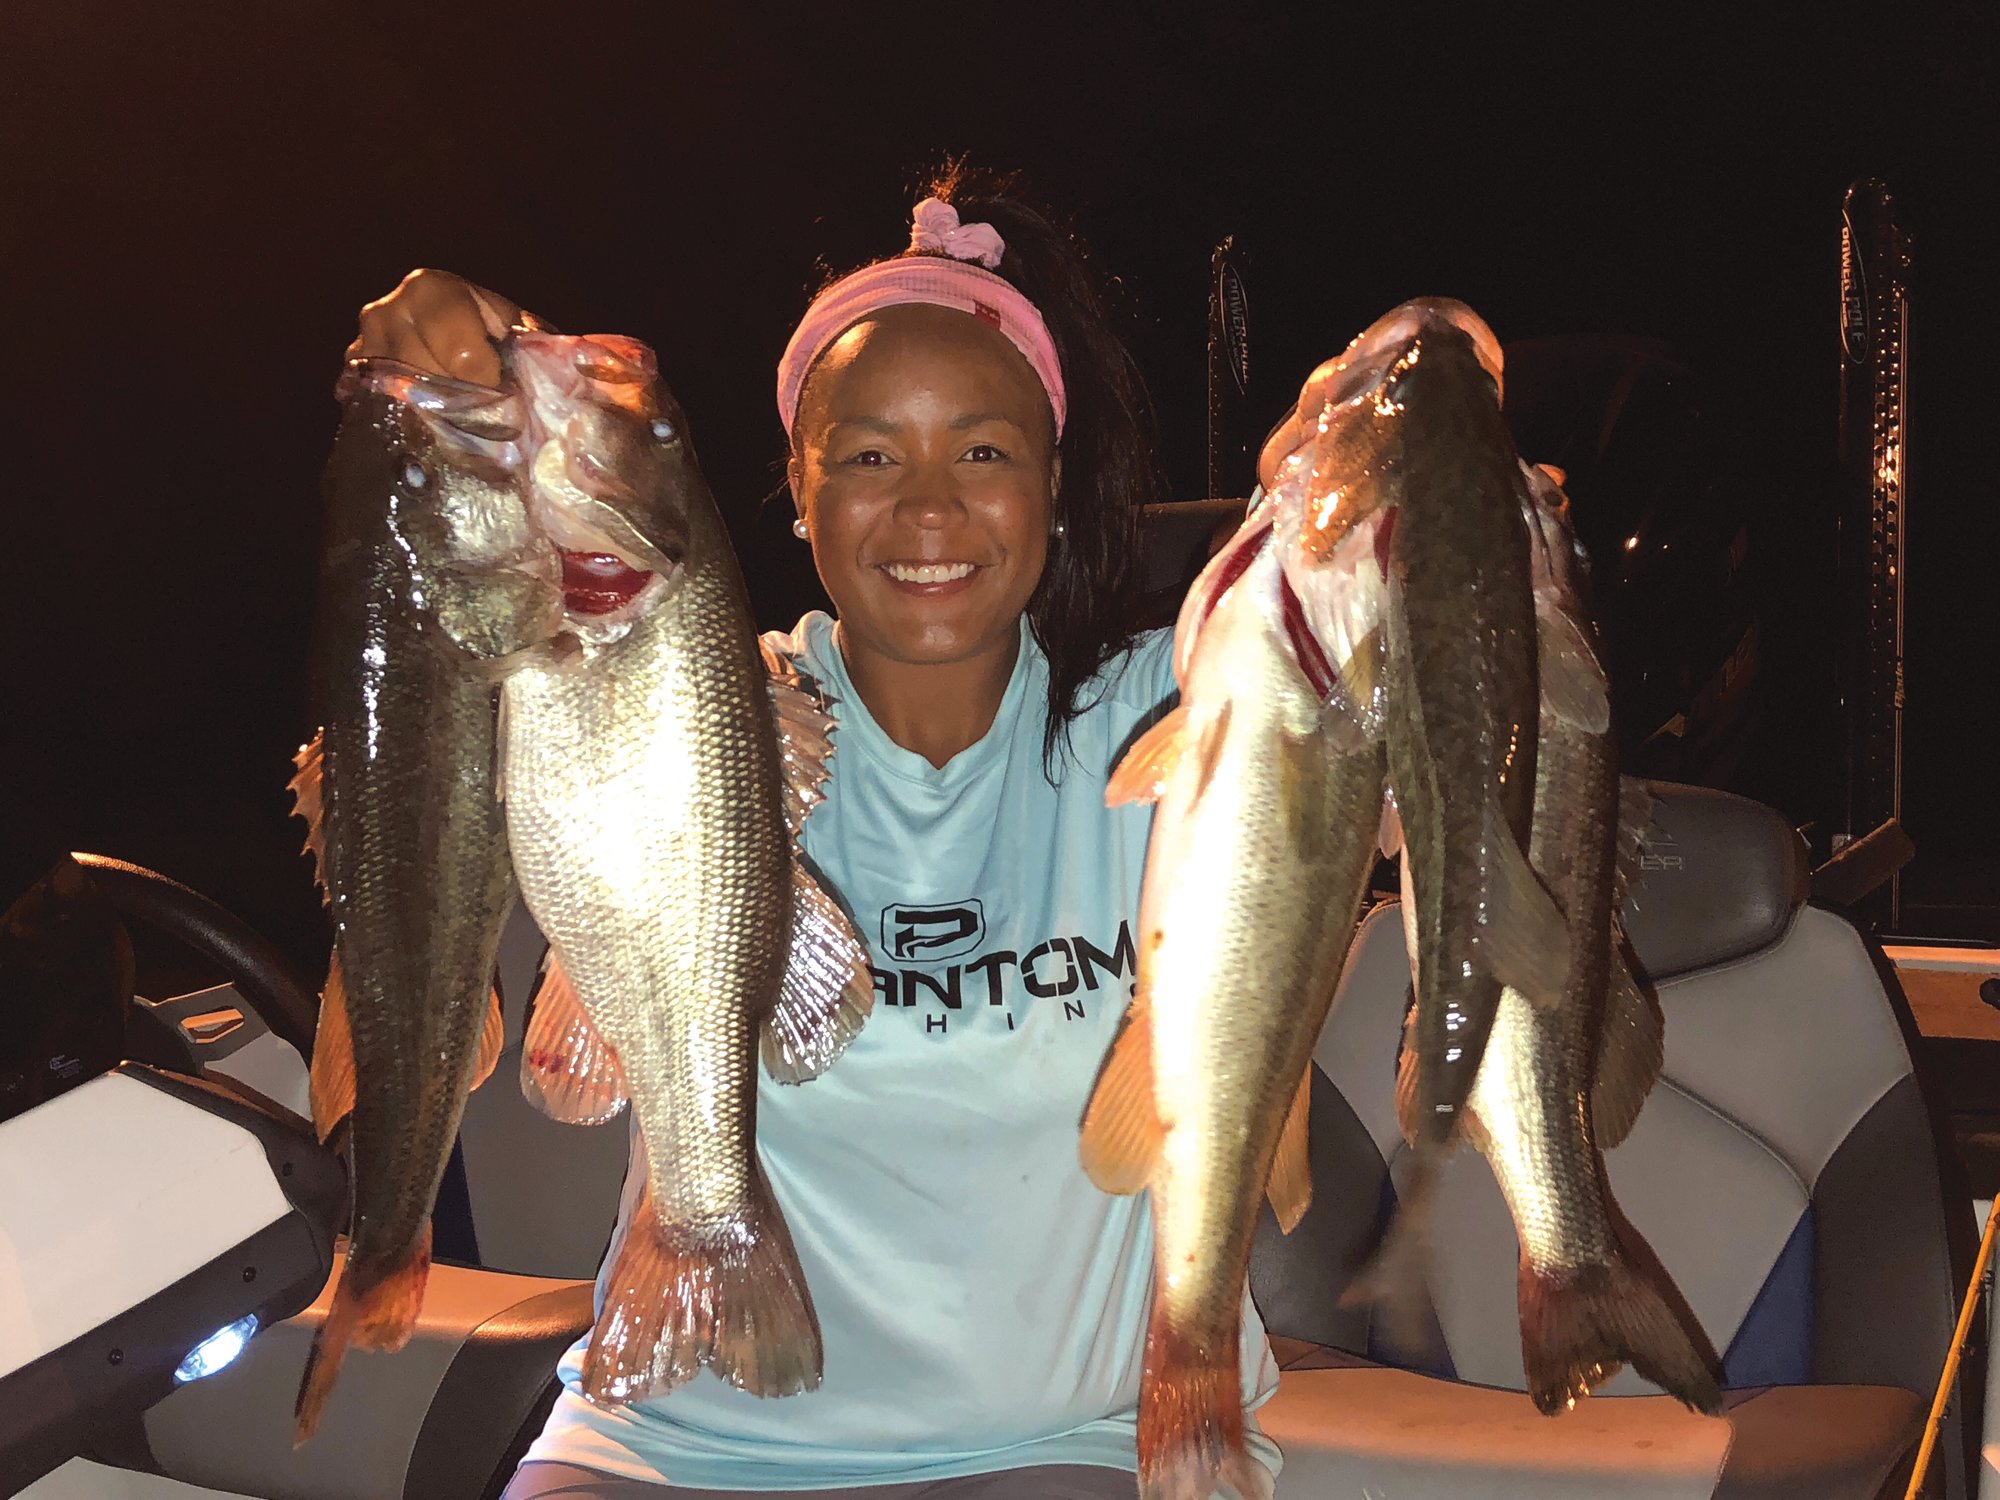 26-year-old female angler from Sumter makes cover of Bassmaster magazine -  The Sumter Item